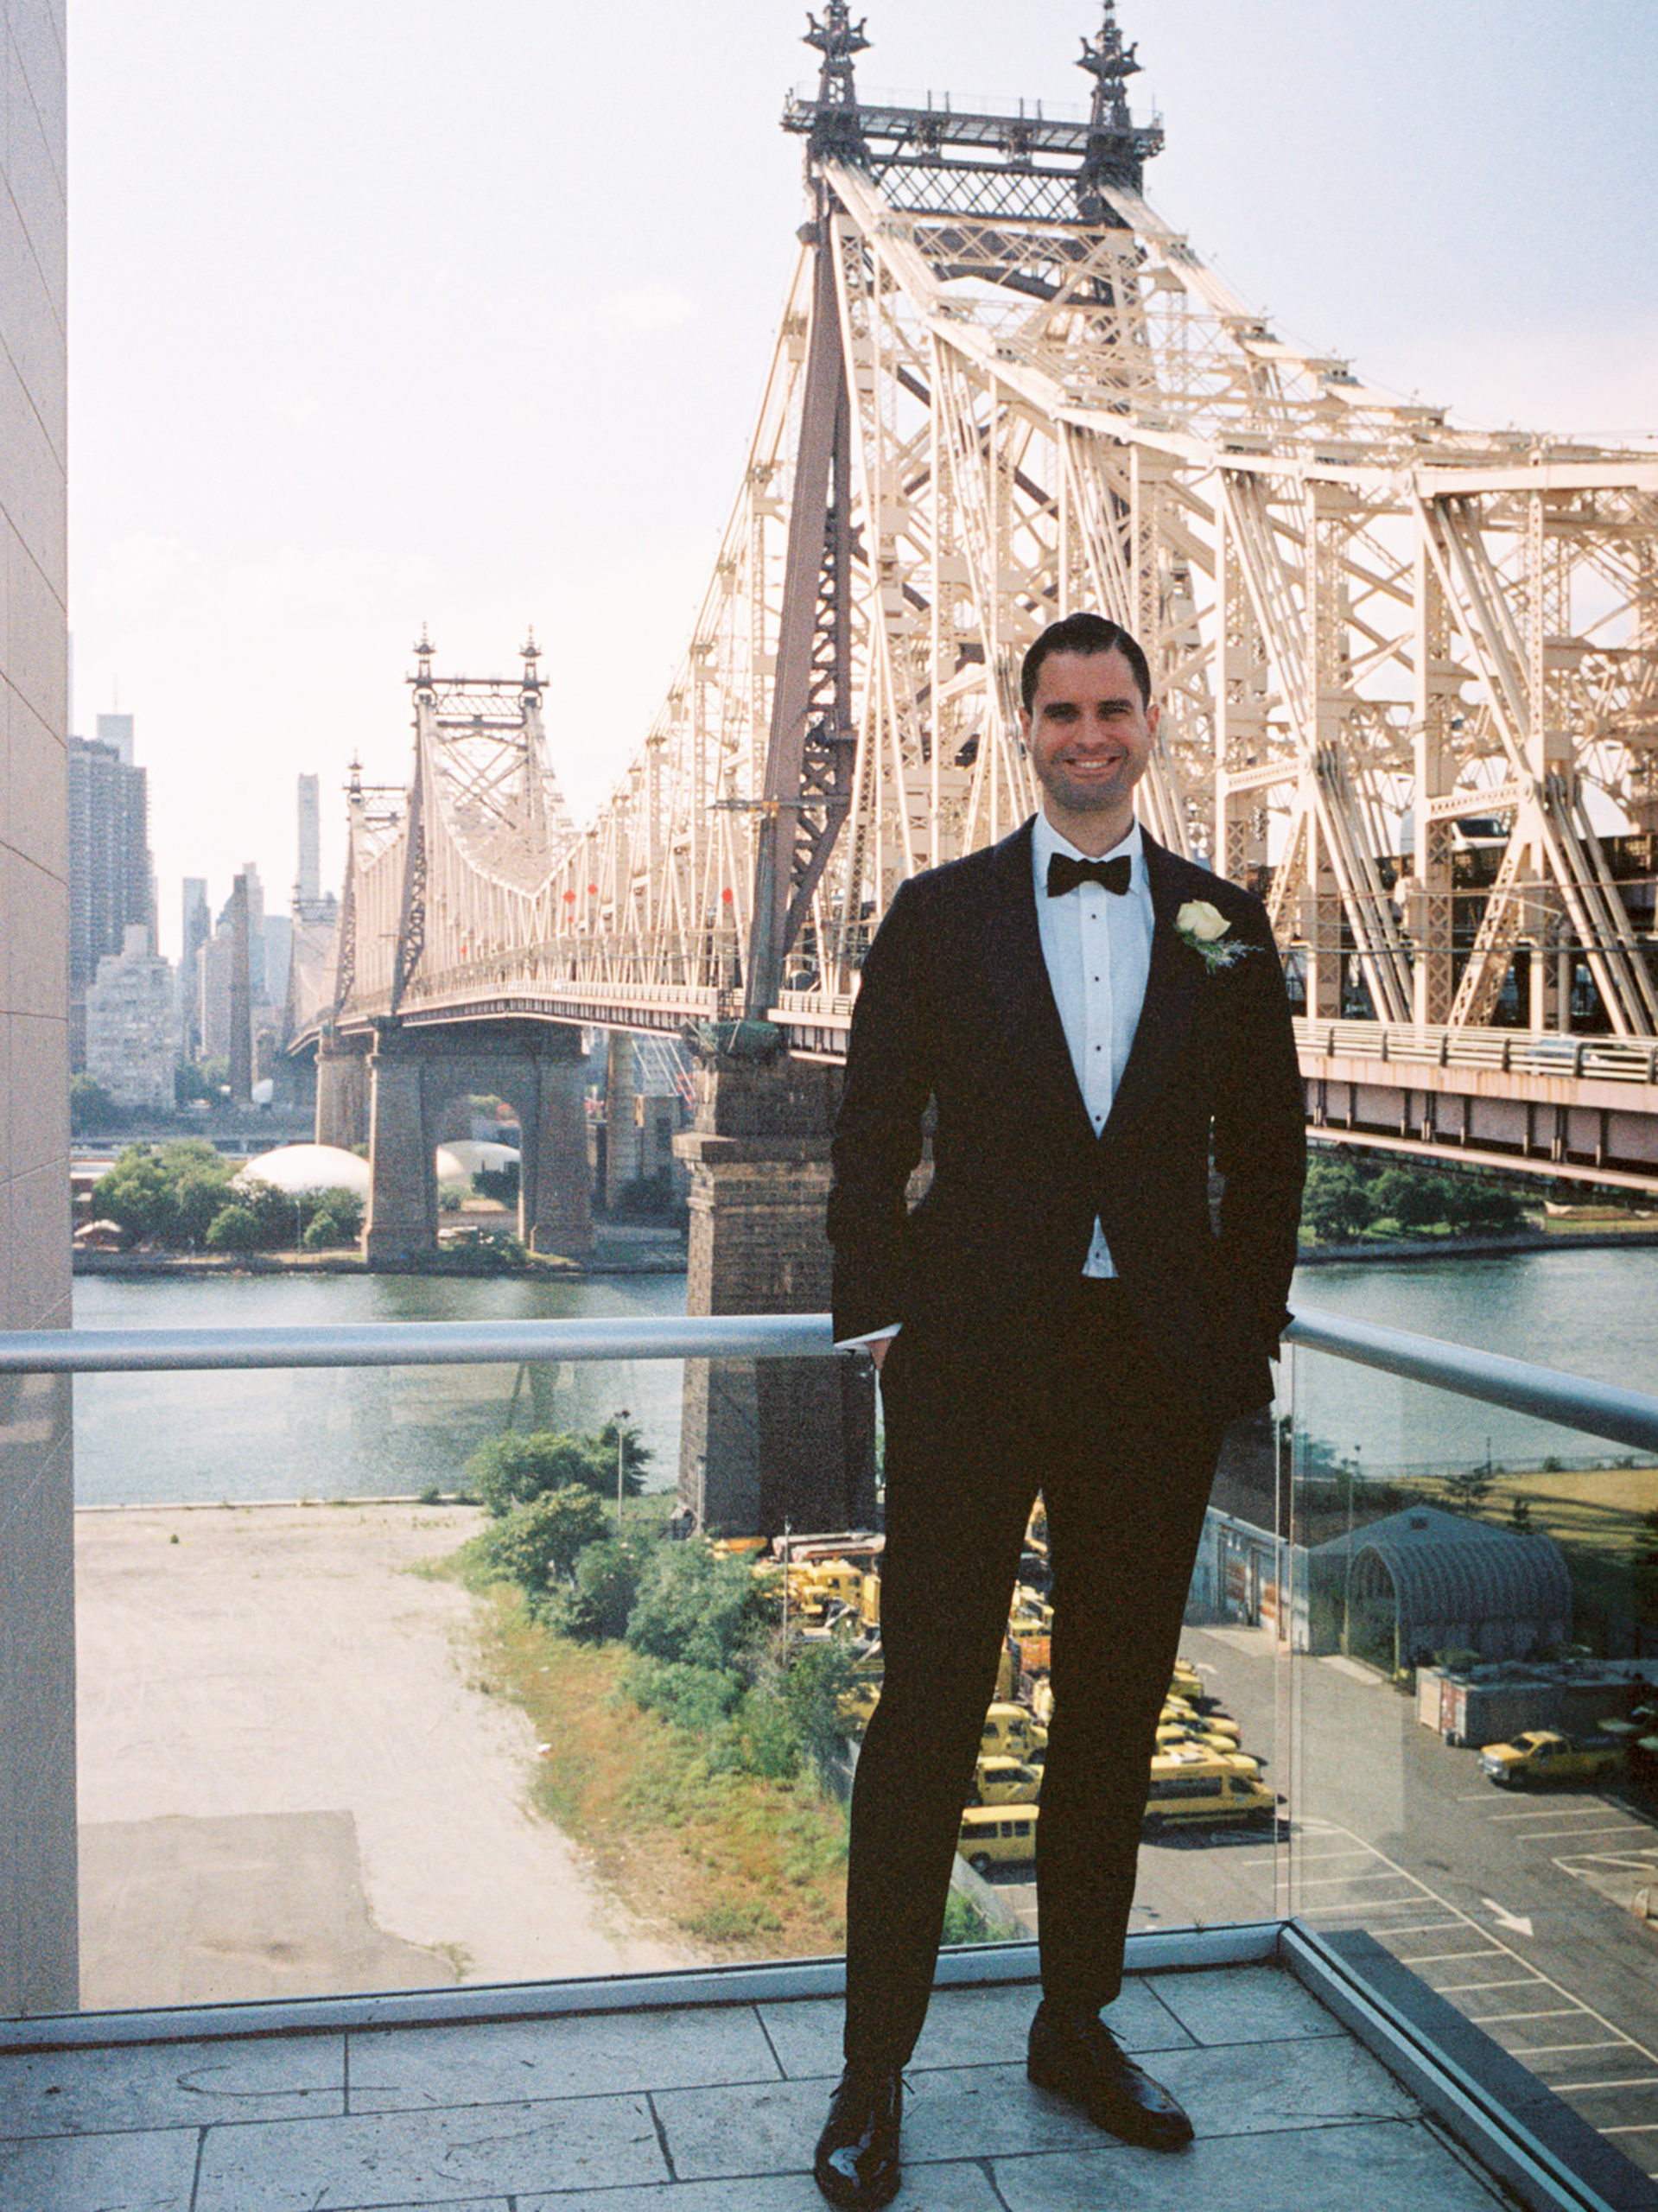 A portrait of the groom with Brooklyn Bridge in the background. Image by Jenny Fu Studio